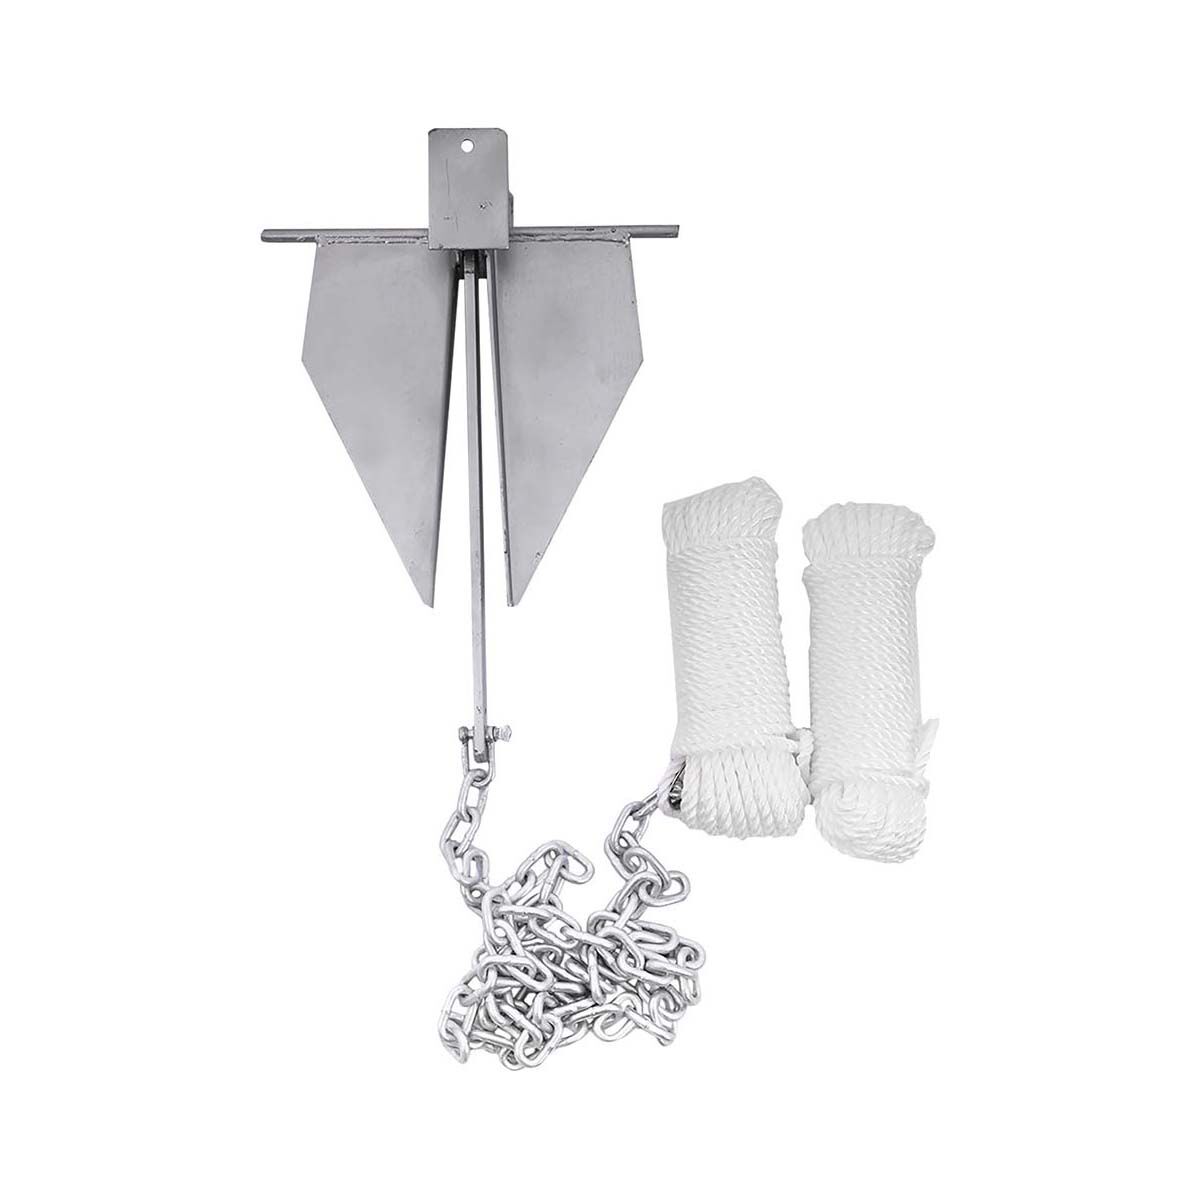 Boat Anchor Accessories For Sale Online Australia